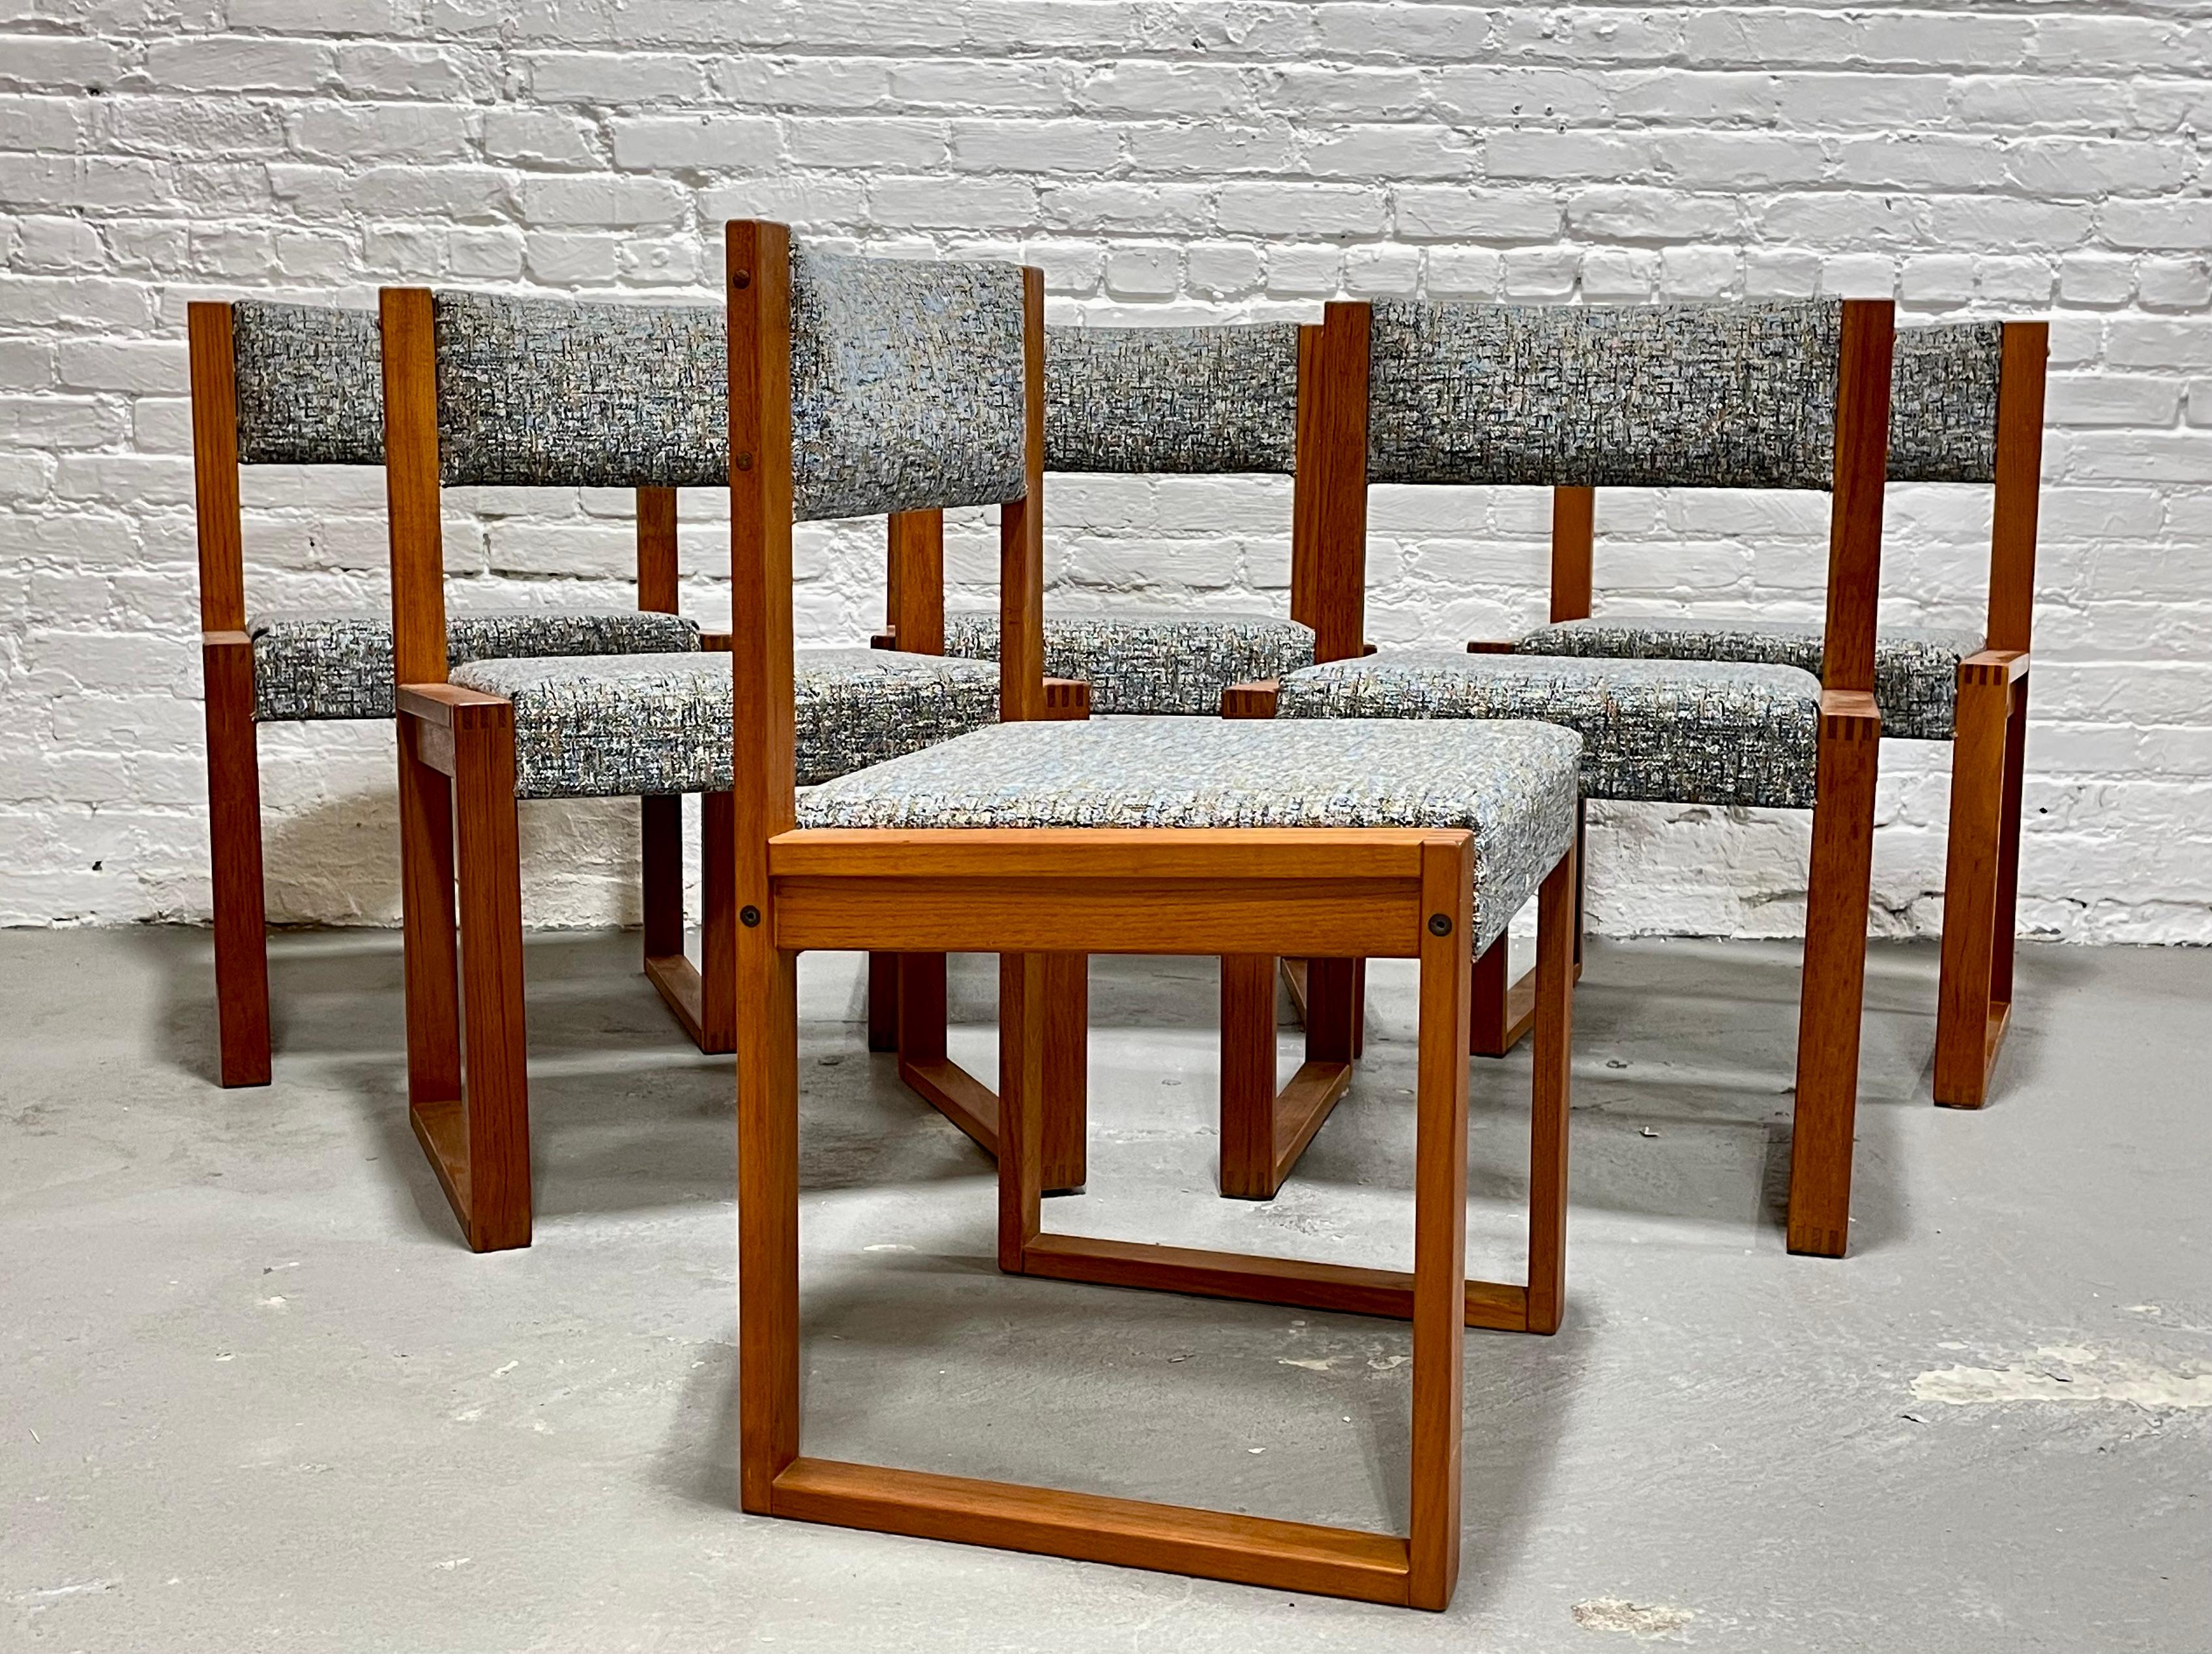 Rare set of six Teak Mid Century Modern DANISH Dining Chairs, c. 1960's.  The solid wood frames have the best straight lines with dovetailed detailing. There is a slight curve to the backrests which is not only visually stunning but also provides a